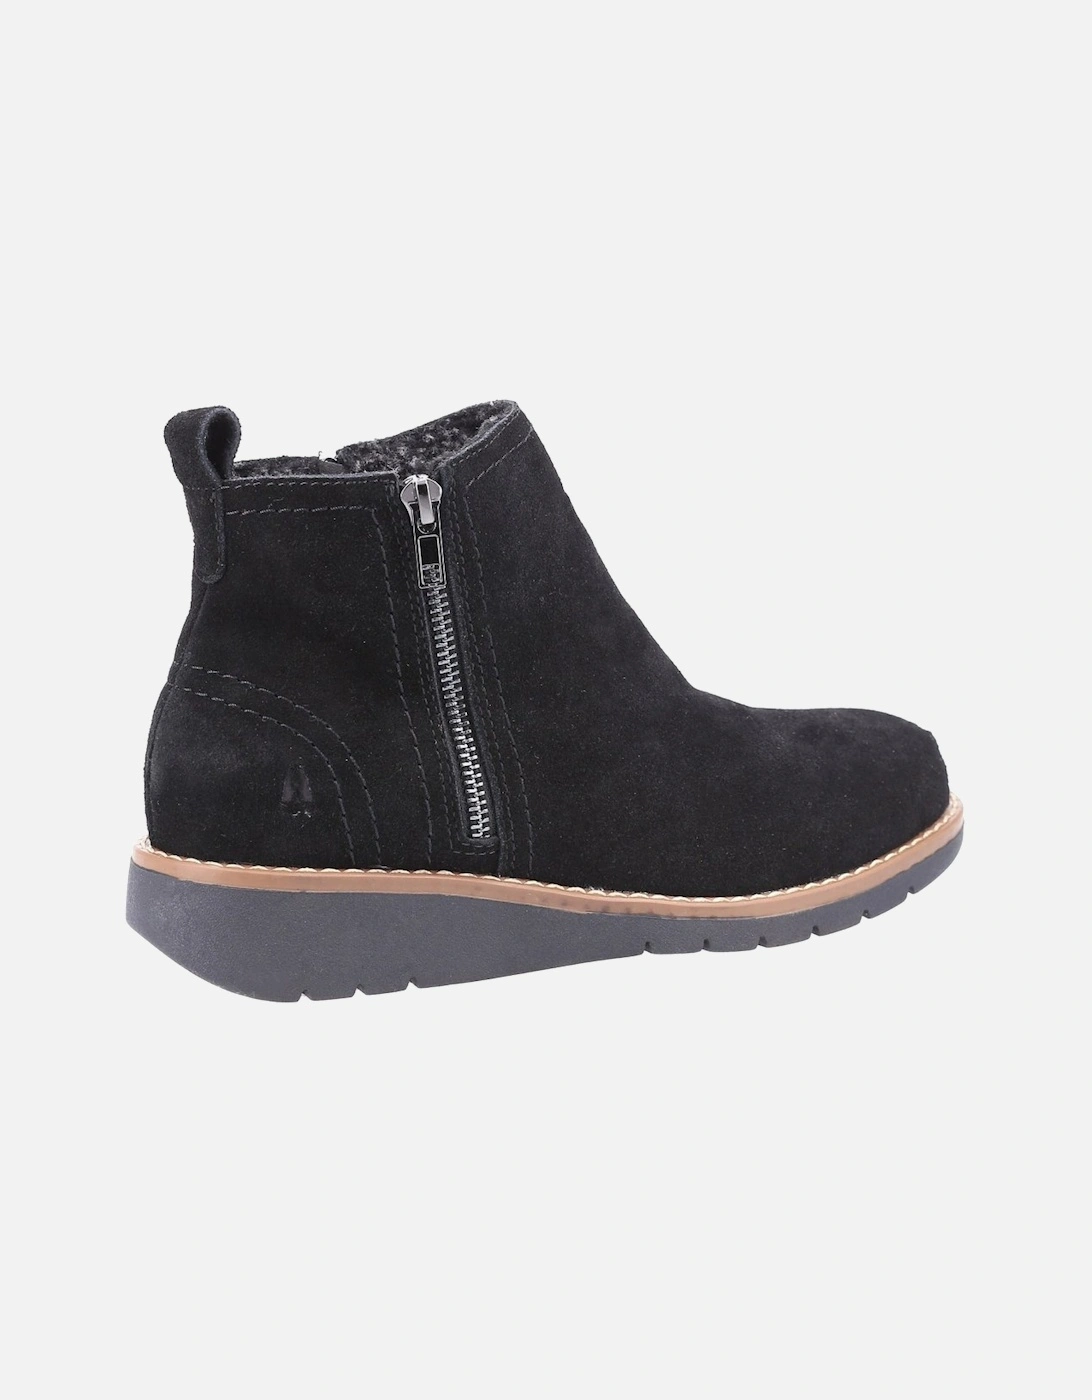 Libby Womens Ankle Boots